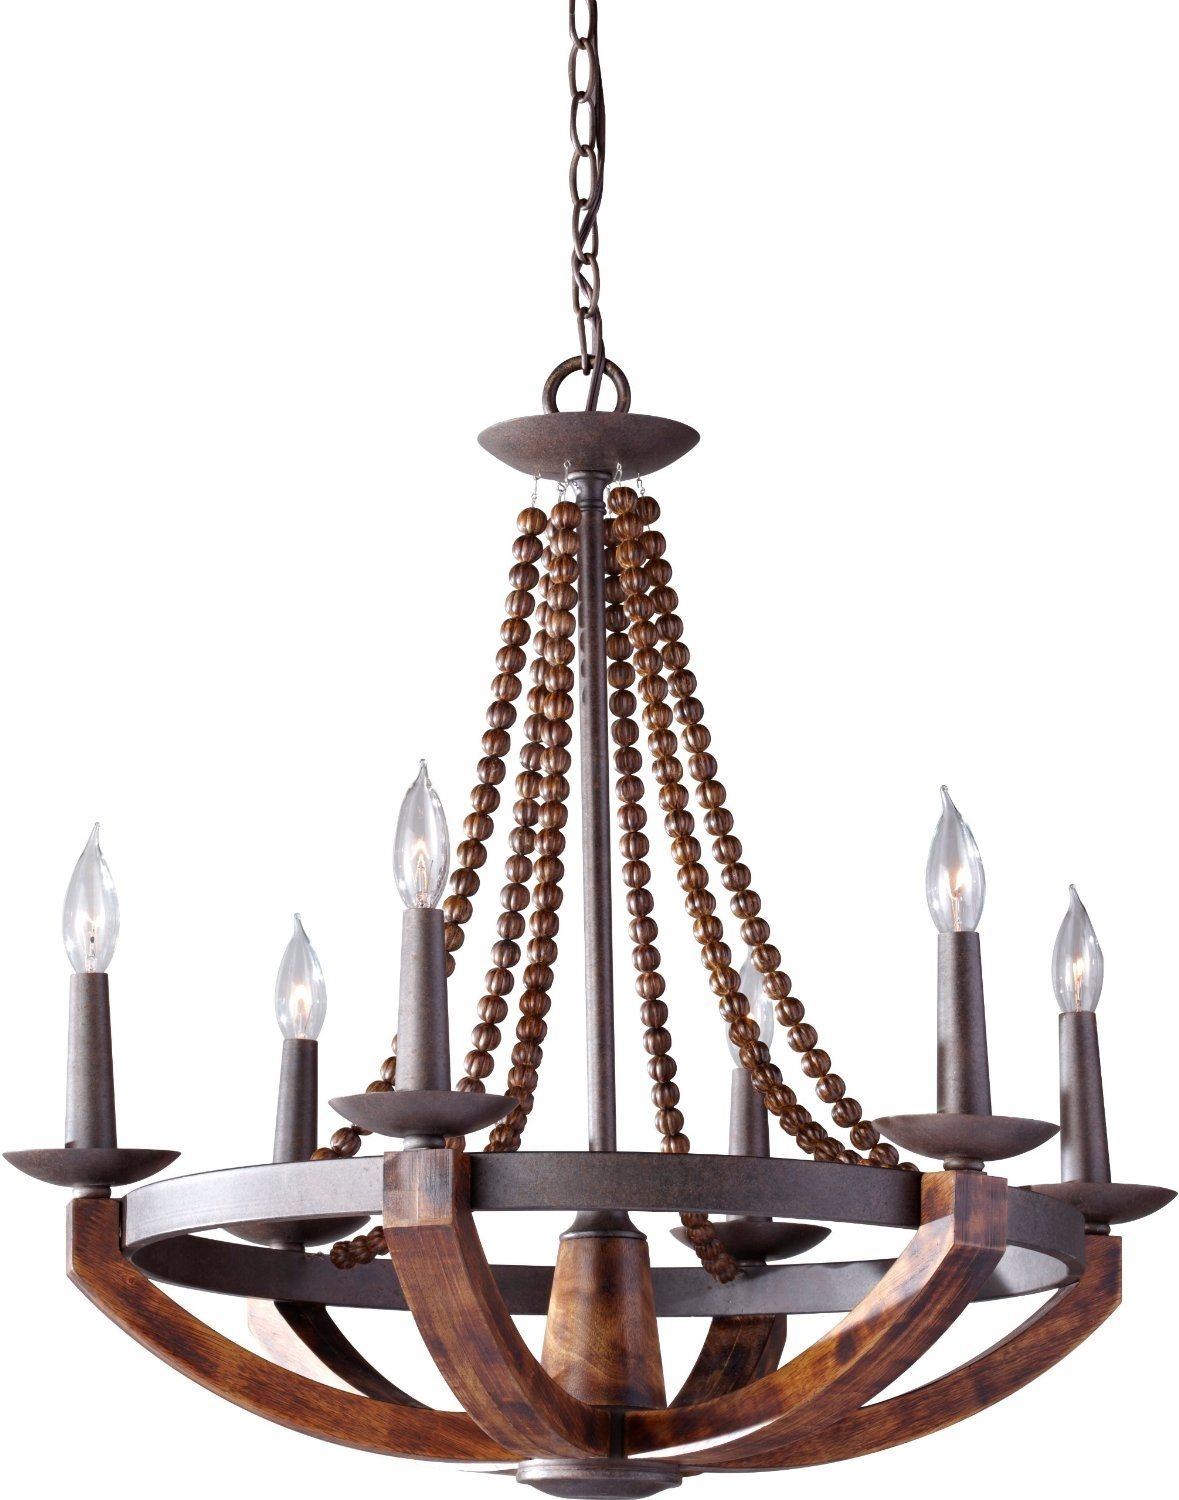 12 Best Rustic Wood And Metal Chandeliers Qosy Intended For Metal Chandeliers (View 9 of 12)